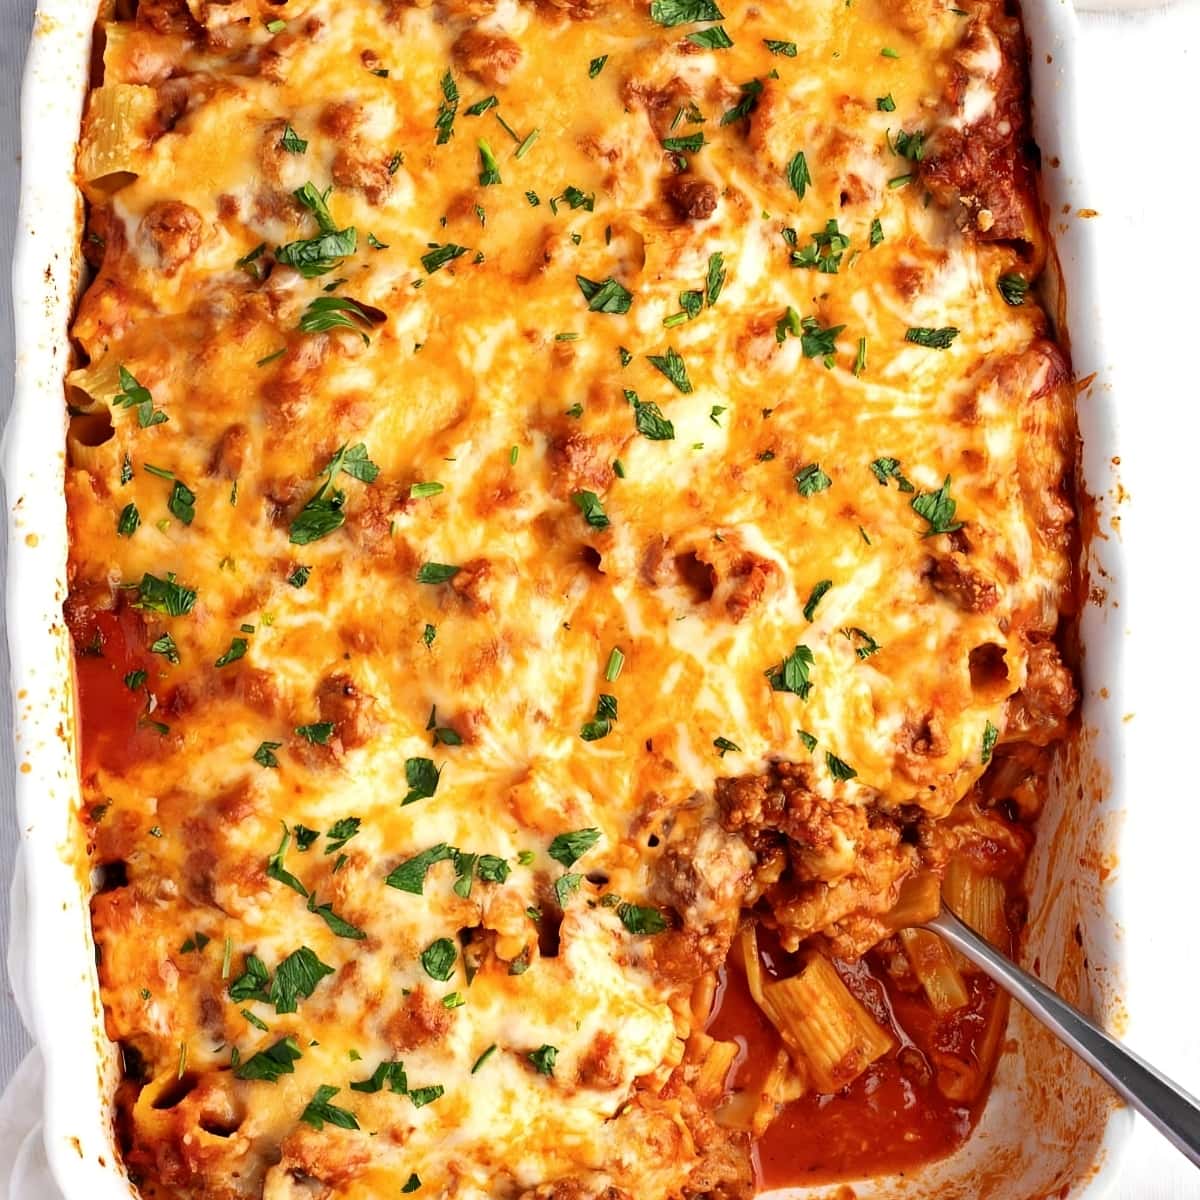 Cheesy Baked Rigatoni with Ground Beef in a white casserole dish, top view